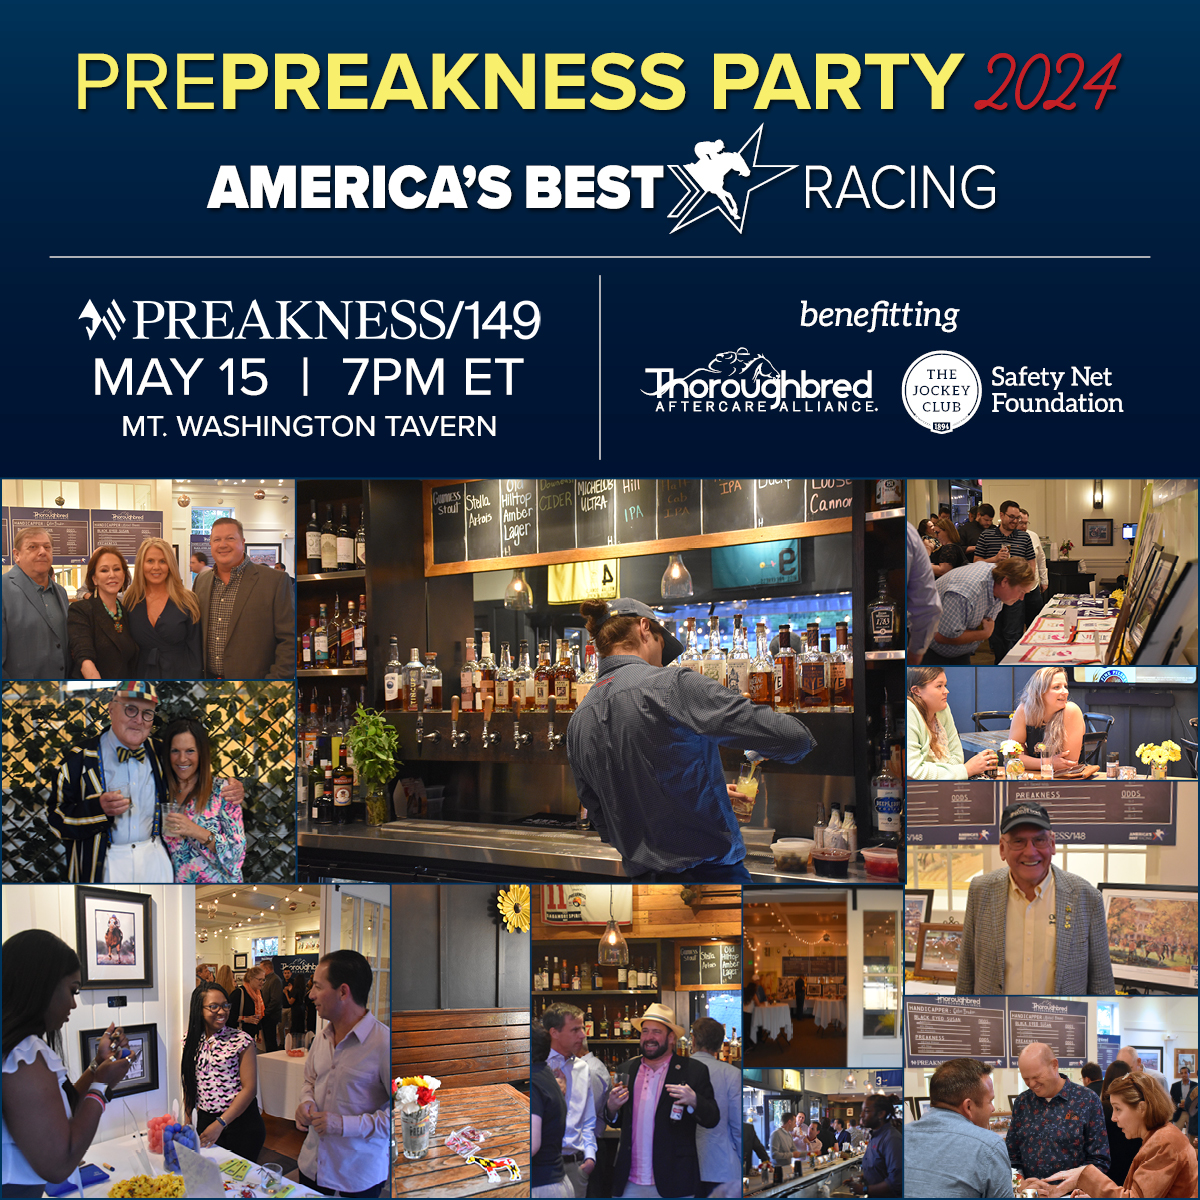 Hard to believe it's already that time of year. Thrilled to be partnering with @TBaftercare, @TJC_SafetyNet & @edbrownsociety on the 9th Annual @ABRLive Pre-Preakness Party! It's open to everyone - Wednesday, May 15, in Baltimore. Tickets NOW ON SALE! eventbrite.com/e/9th-annual-p…